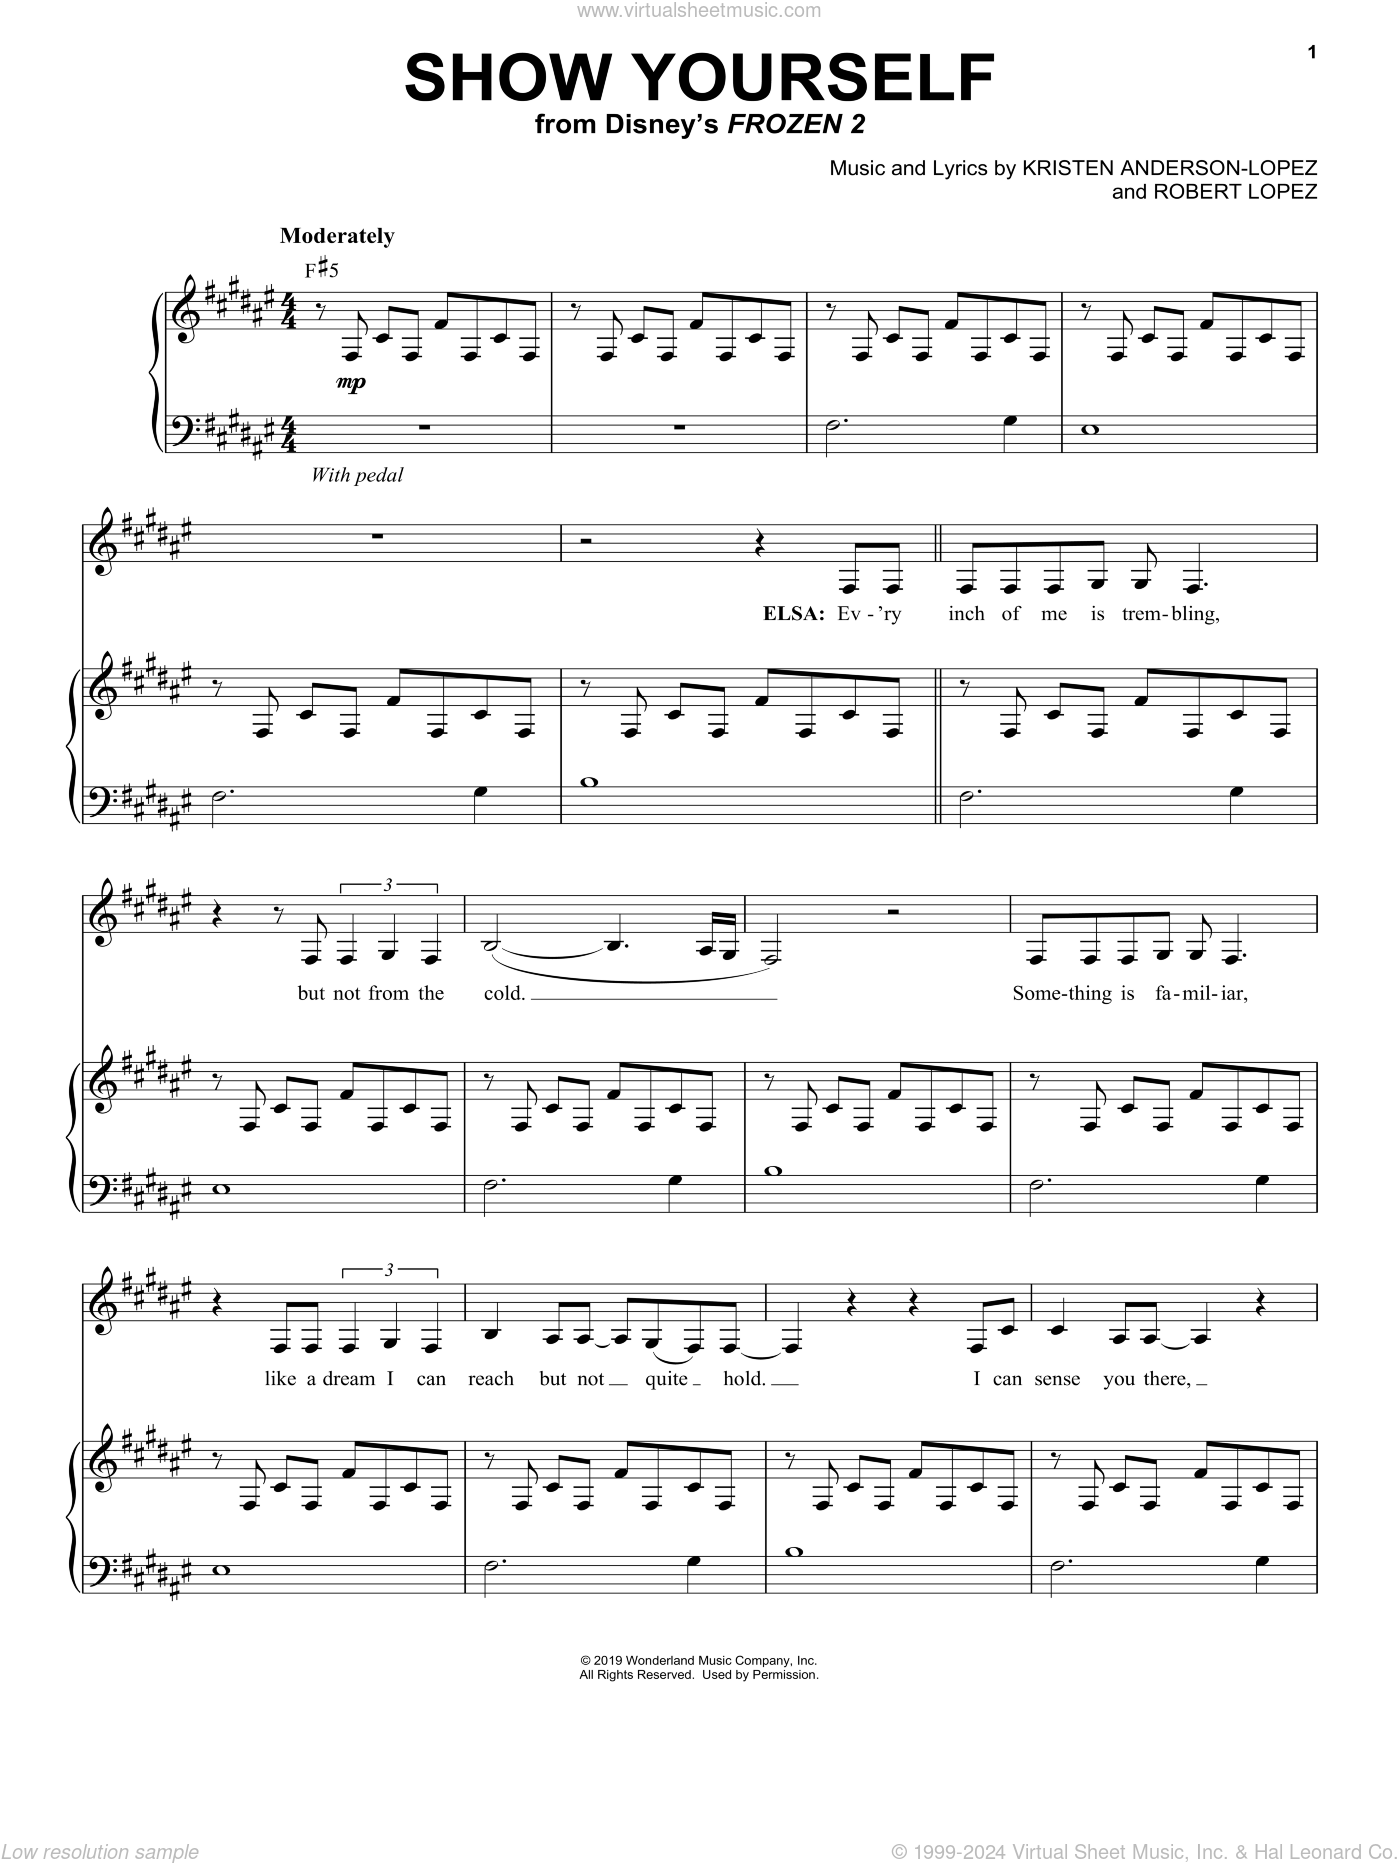 Wood - Show Yourself (from Disney's Frozen 2) sheet music for voice and